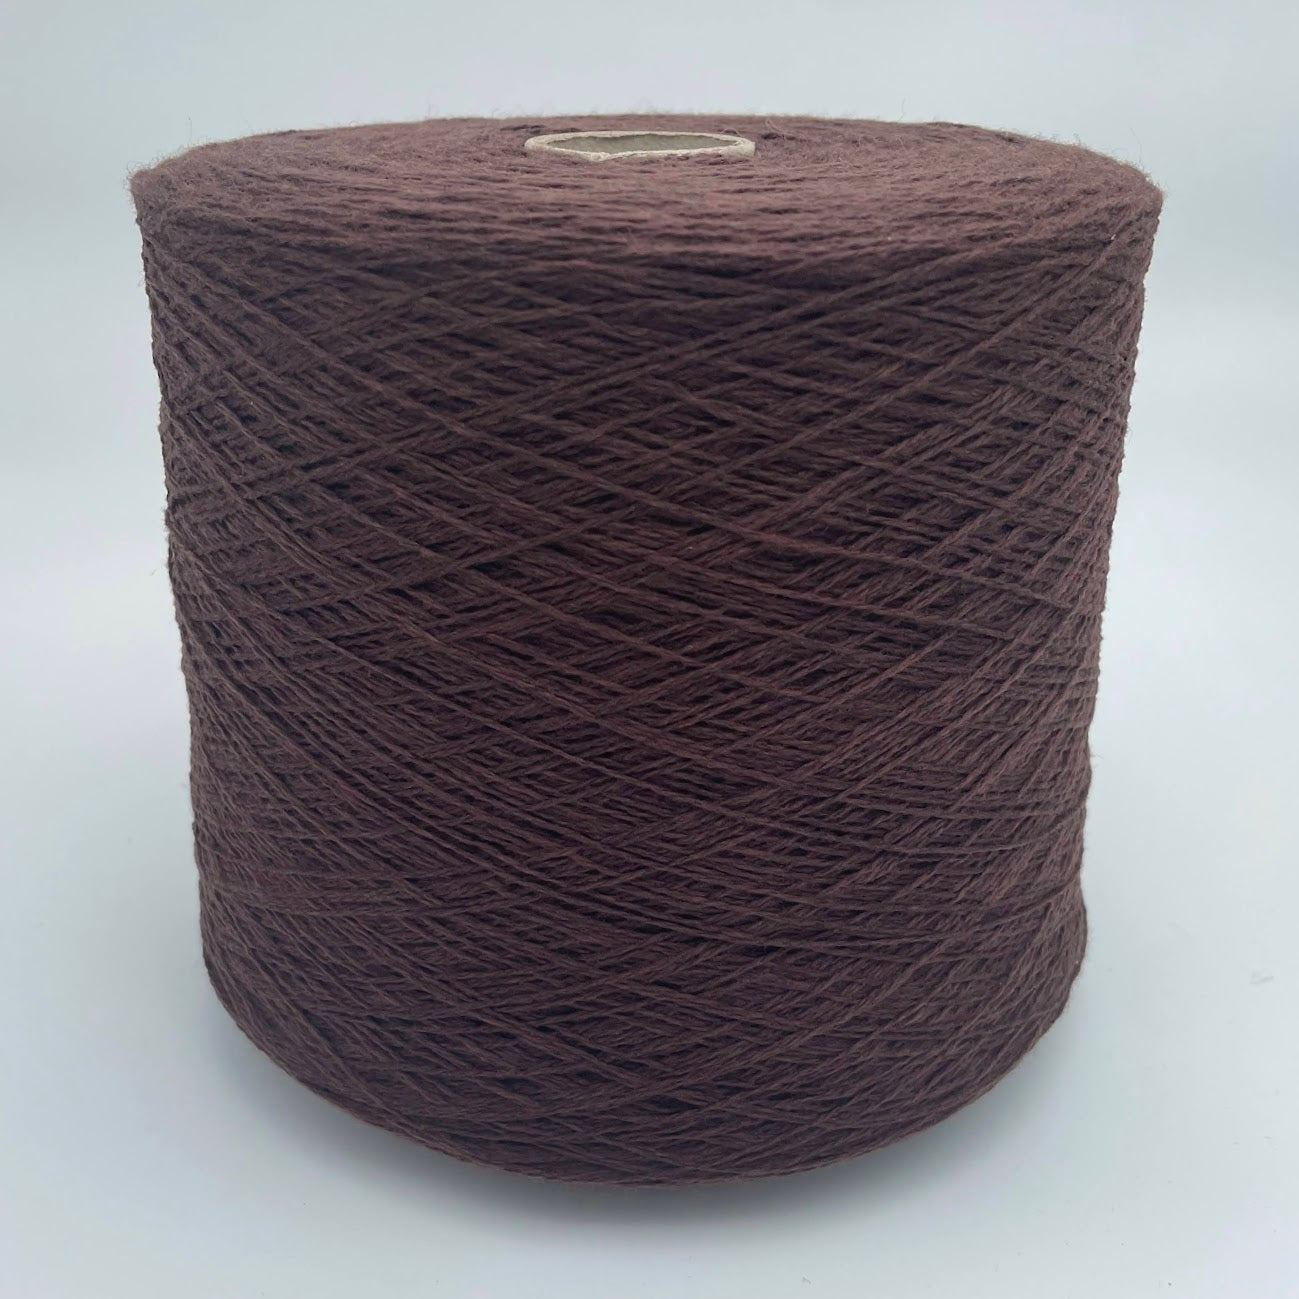 100% Cashmere Yarn - Deadstock Yarn - Made in Italy -  Chocolate Brown - Lace Weight  - 100g